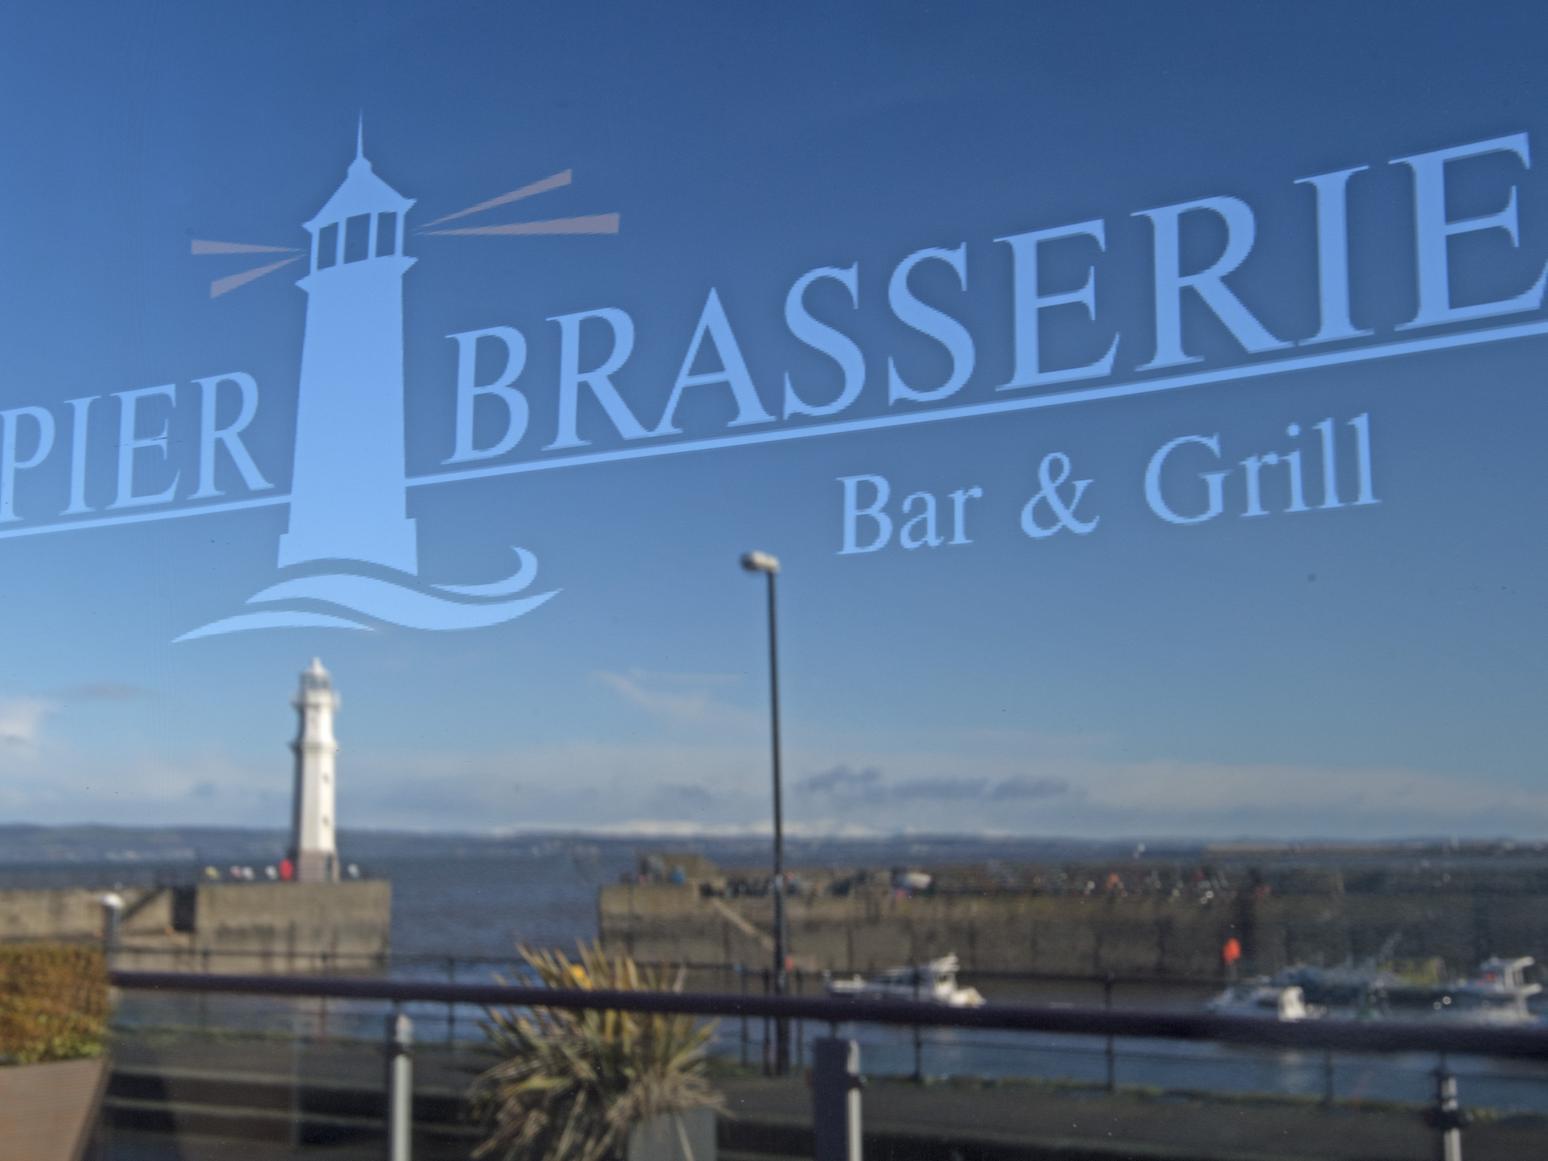 Pier Brasserie is the latest restaurant to take up residence at Newhaven harbour